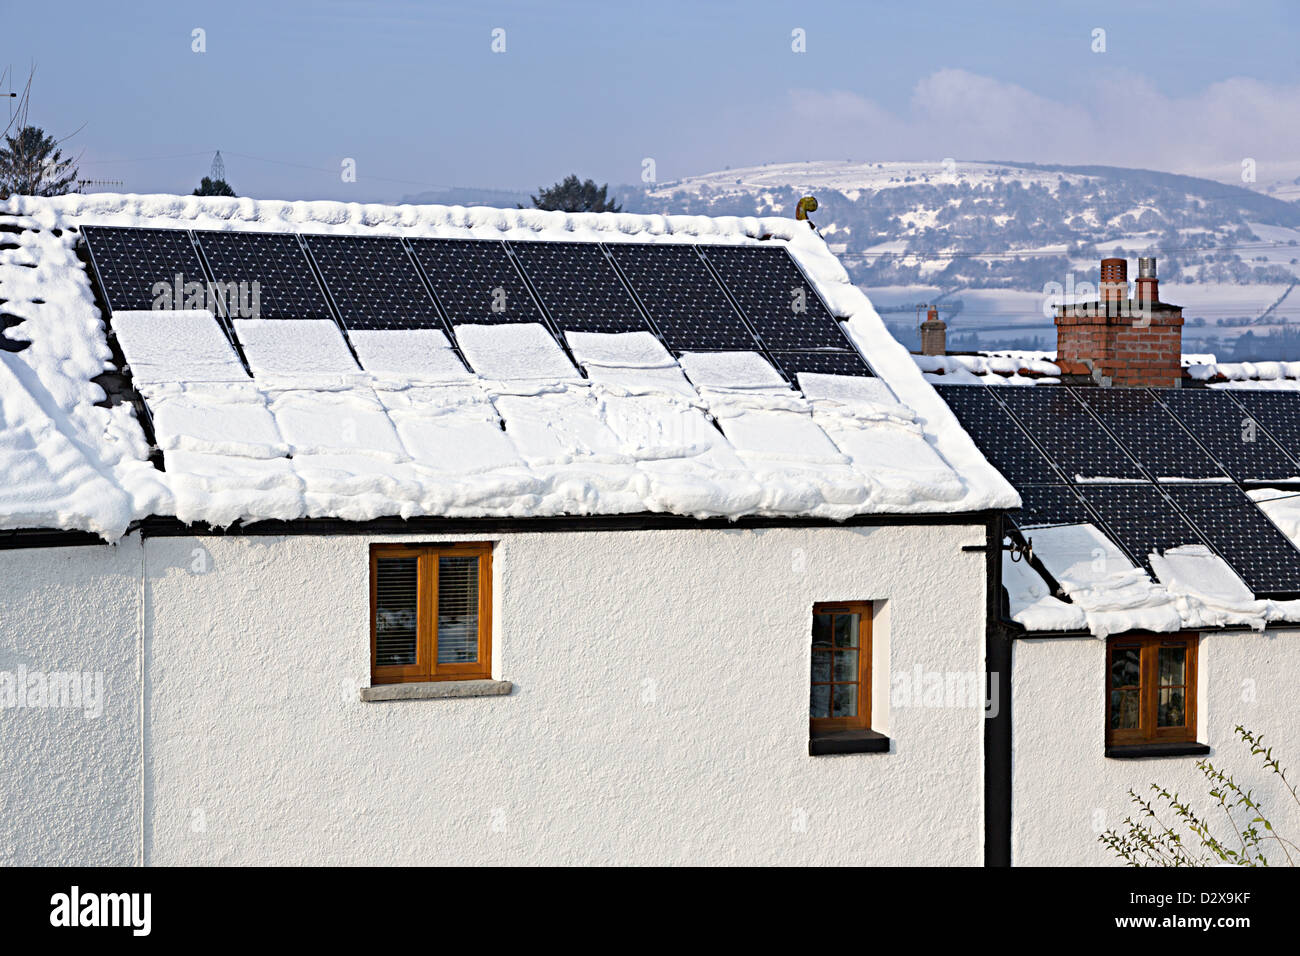 Snow sliding off solar pv panels and putting weight onto gutters of house, Llanfoist, Wales, UK Stock Photo